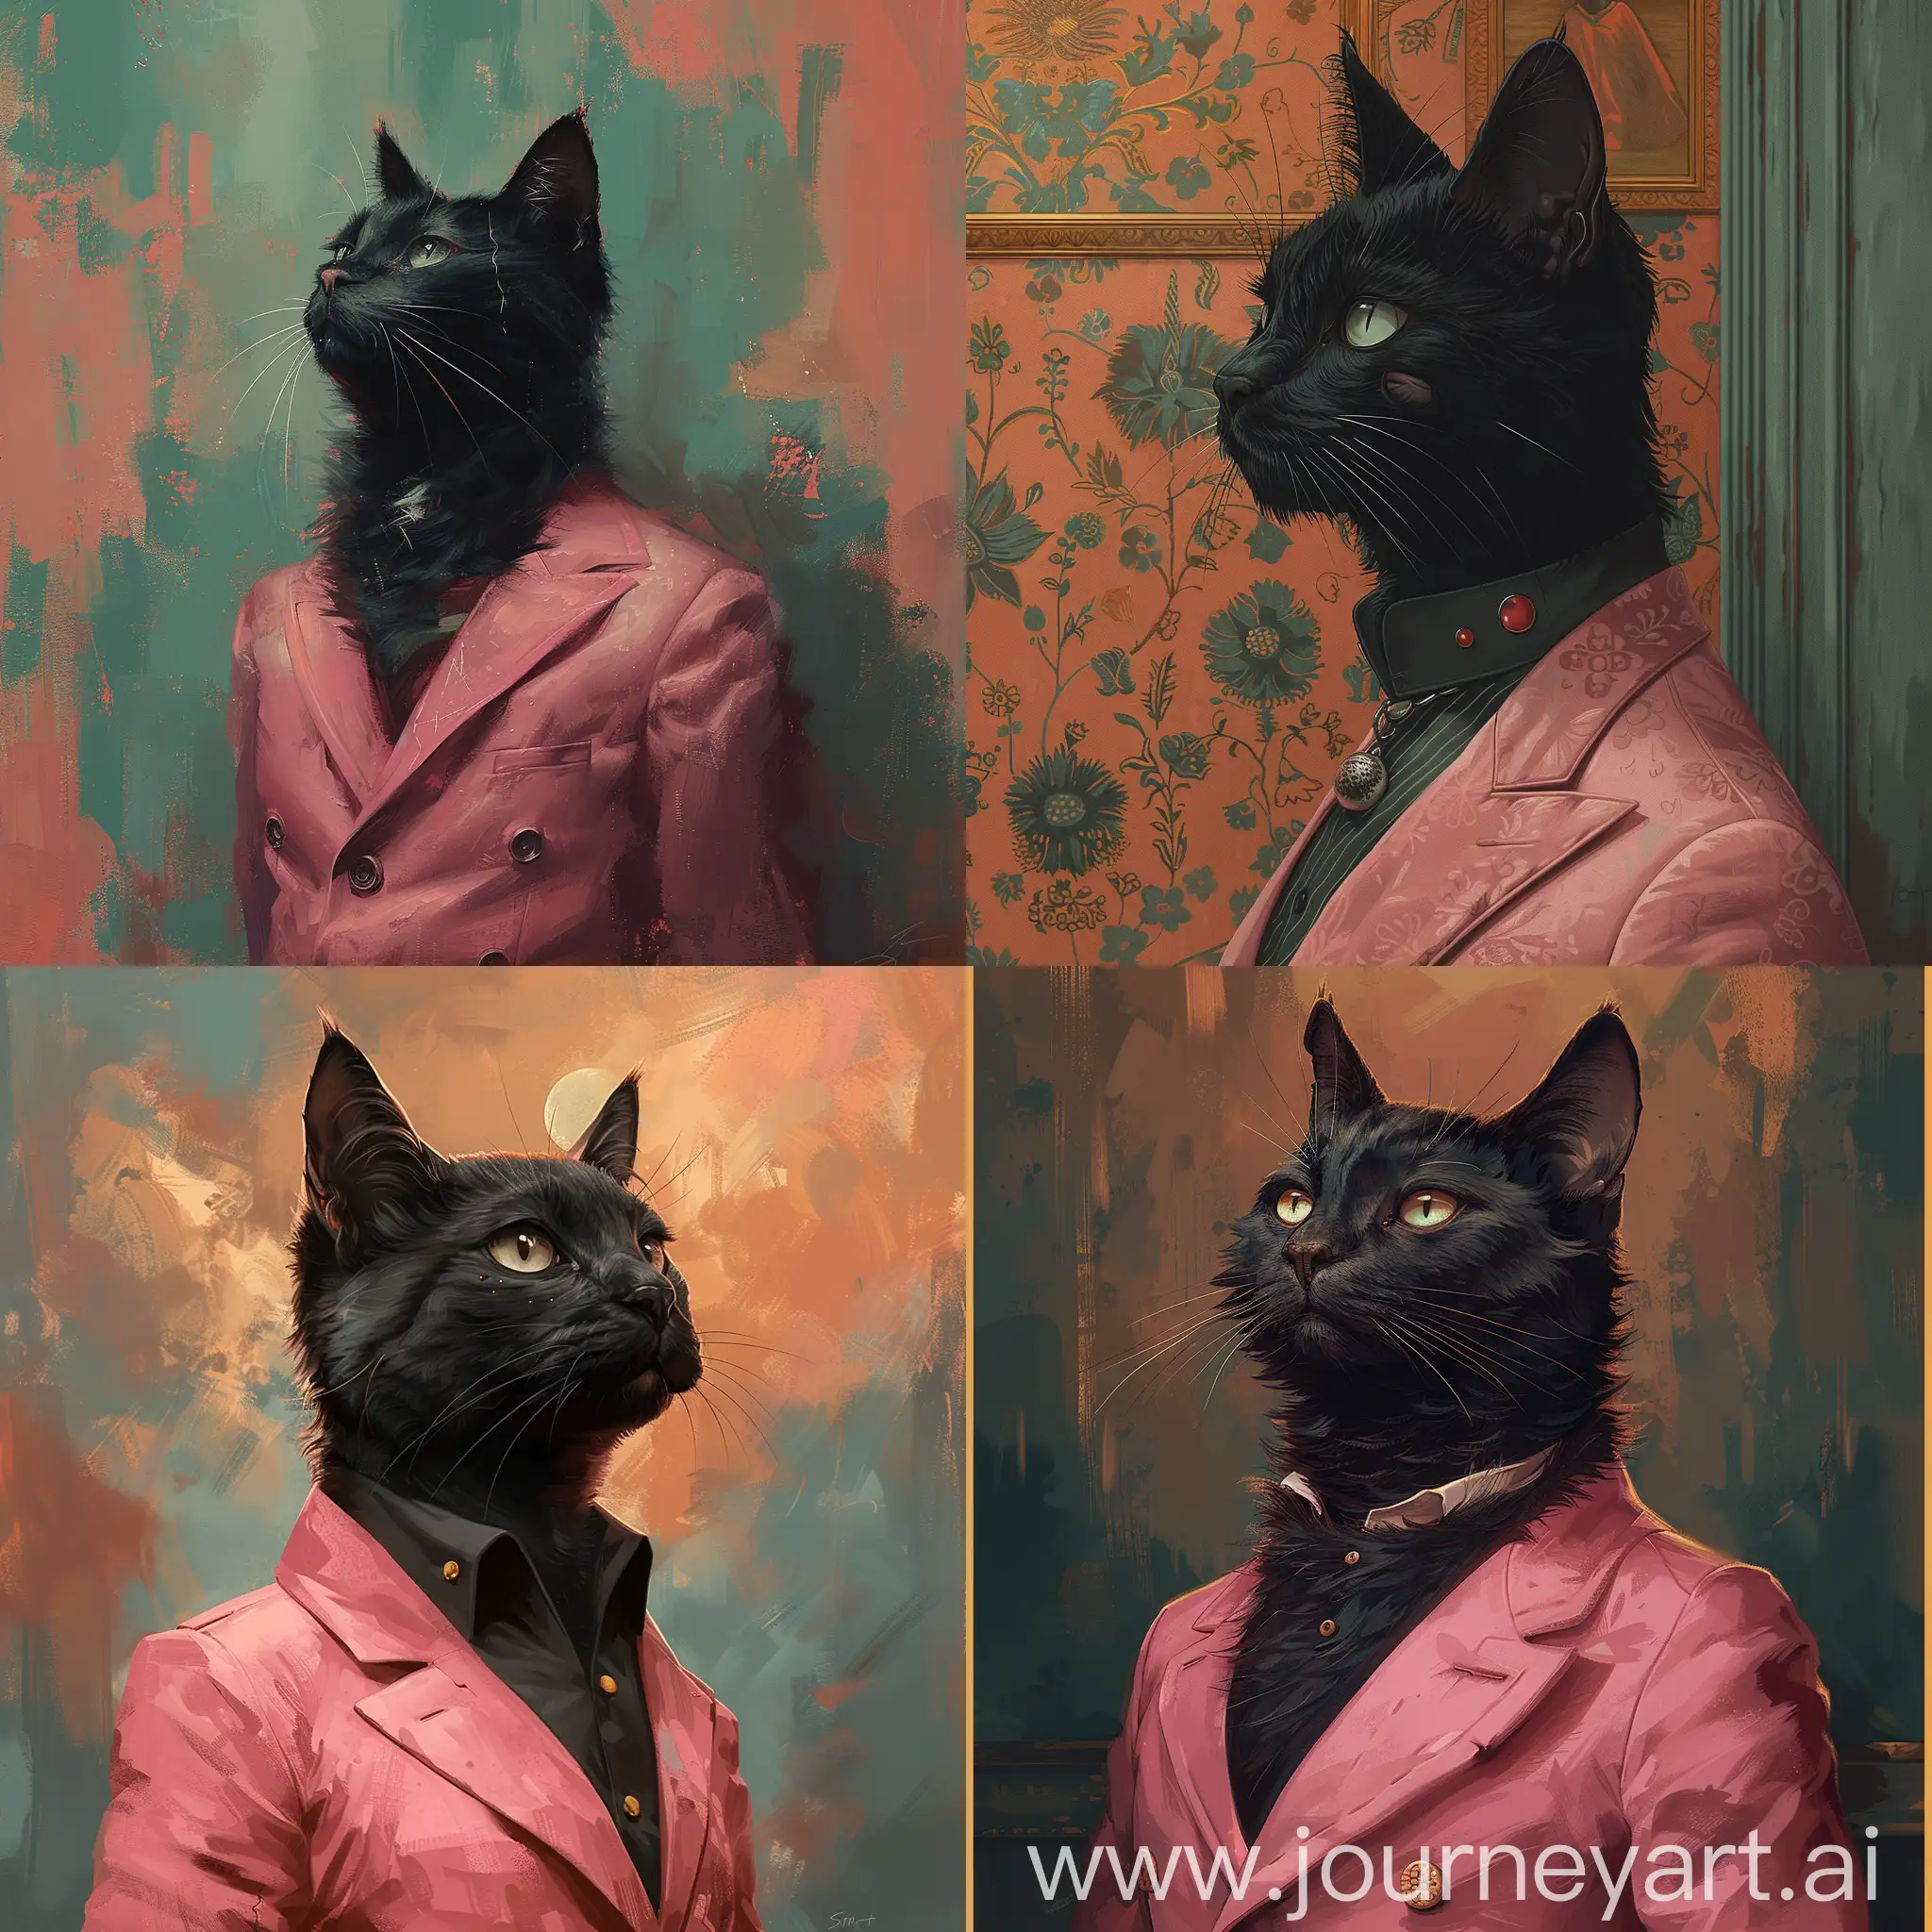 Sam toft art style, serious black cat as human man body, with a facial scar, wearing a pink suit, whimsical yet somber mood, profile picture, pastel hues 
--v 5.2  --s 600 --c 10